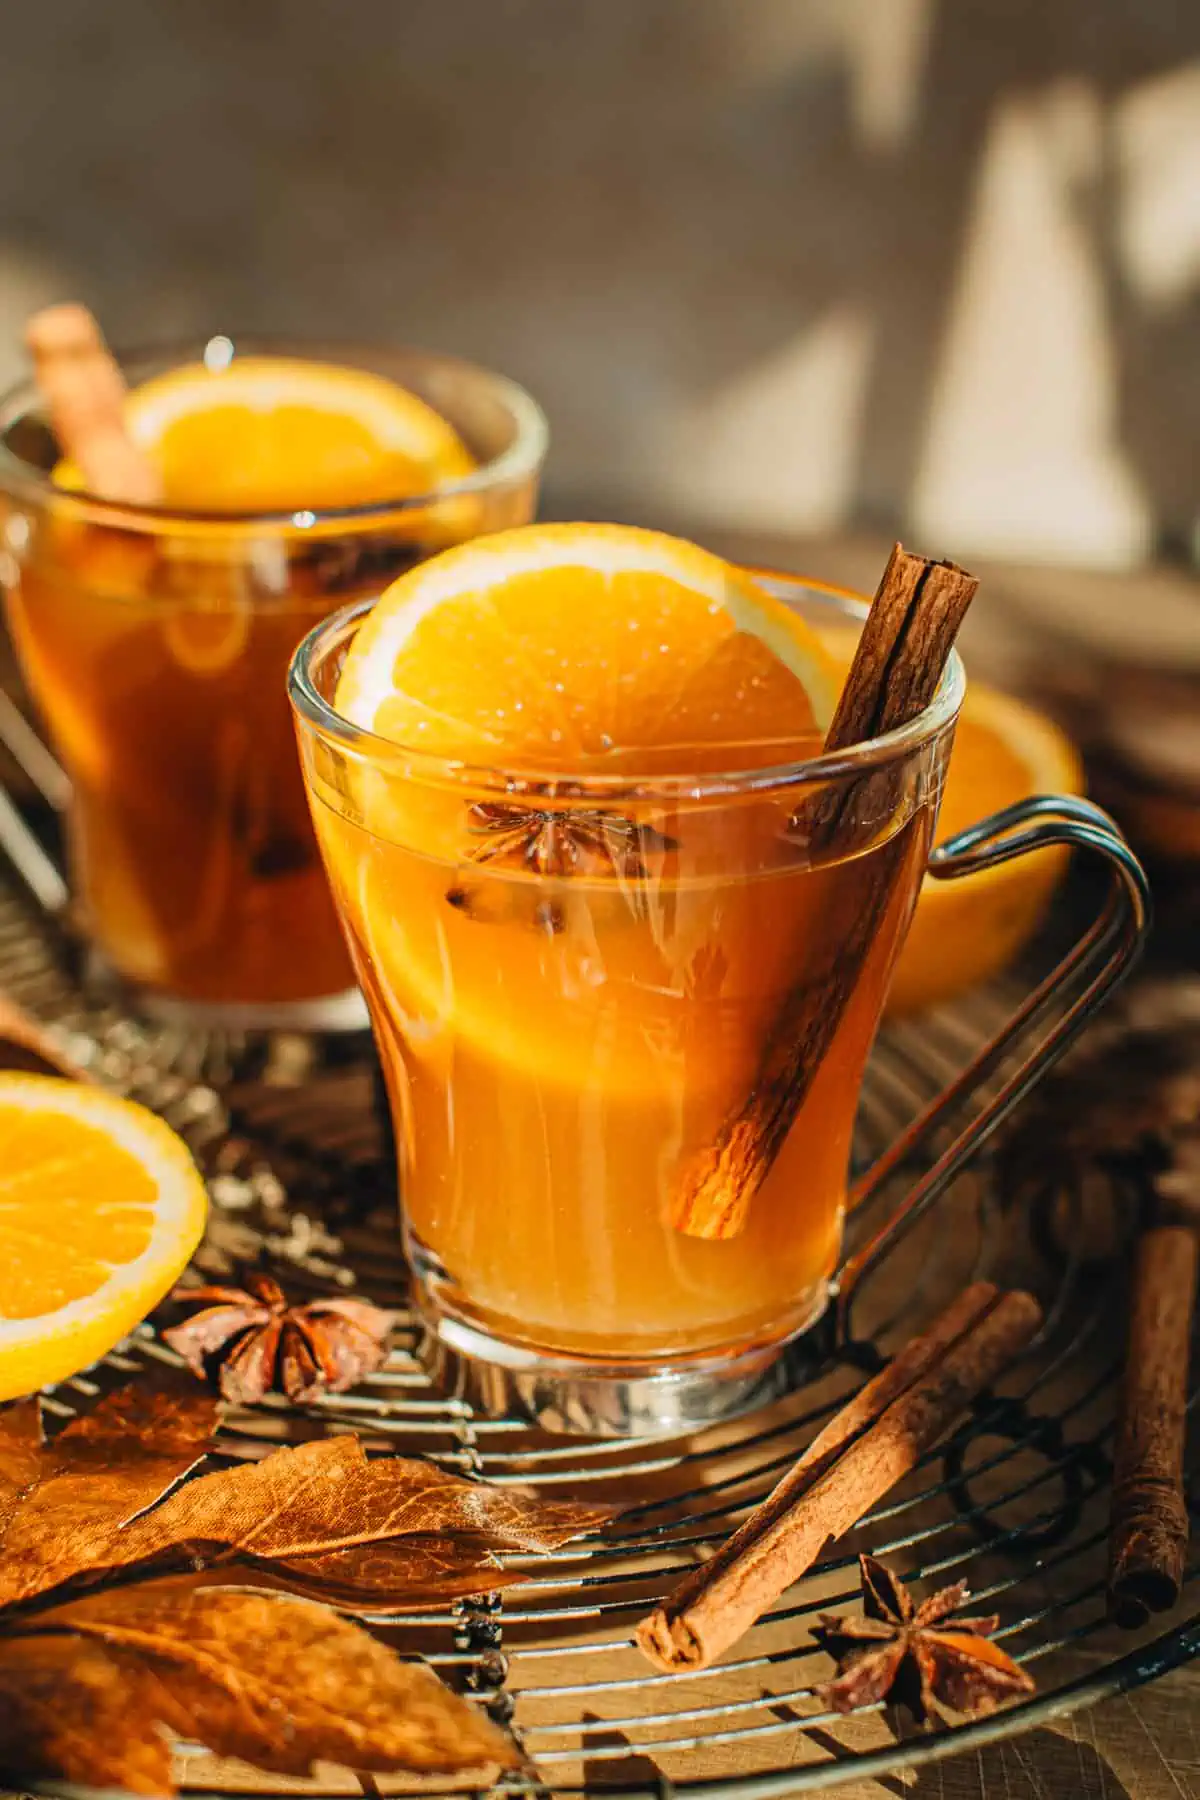 Spiked Apple Cider in a glass mug with orange slices and a cinnamon stick for garnish.